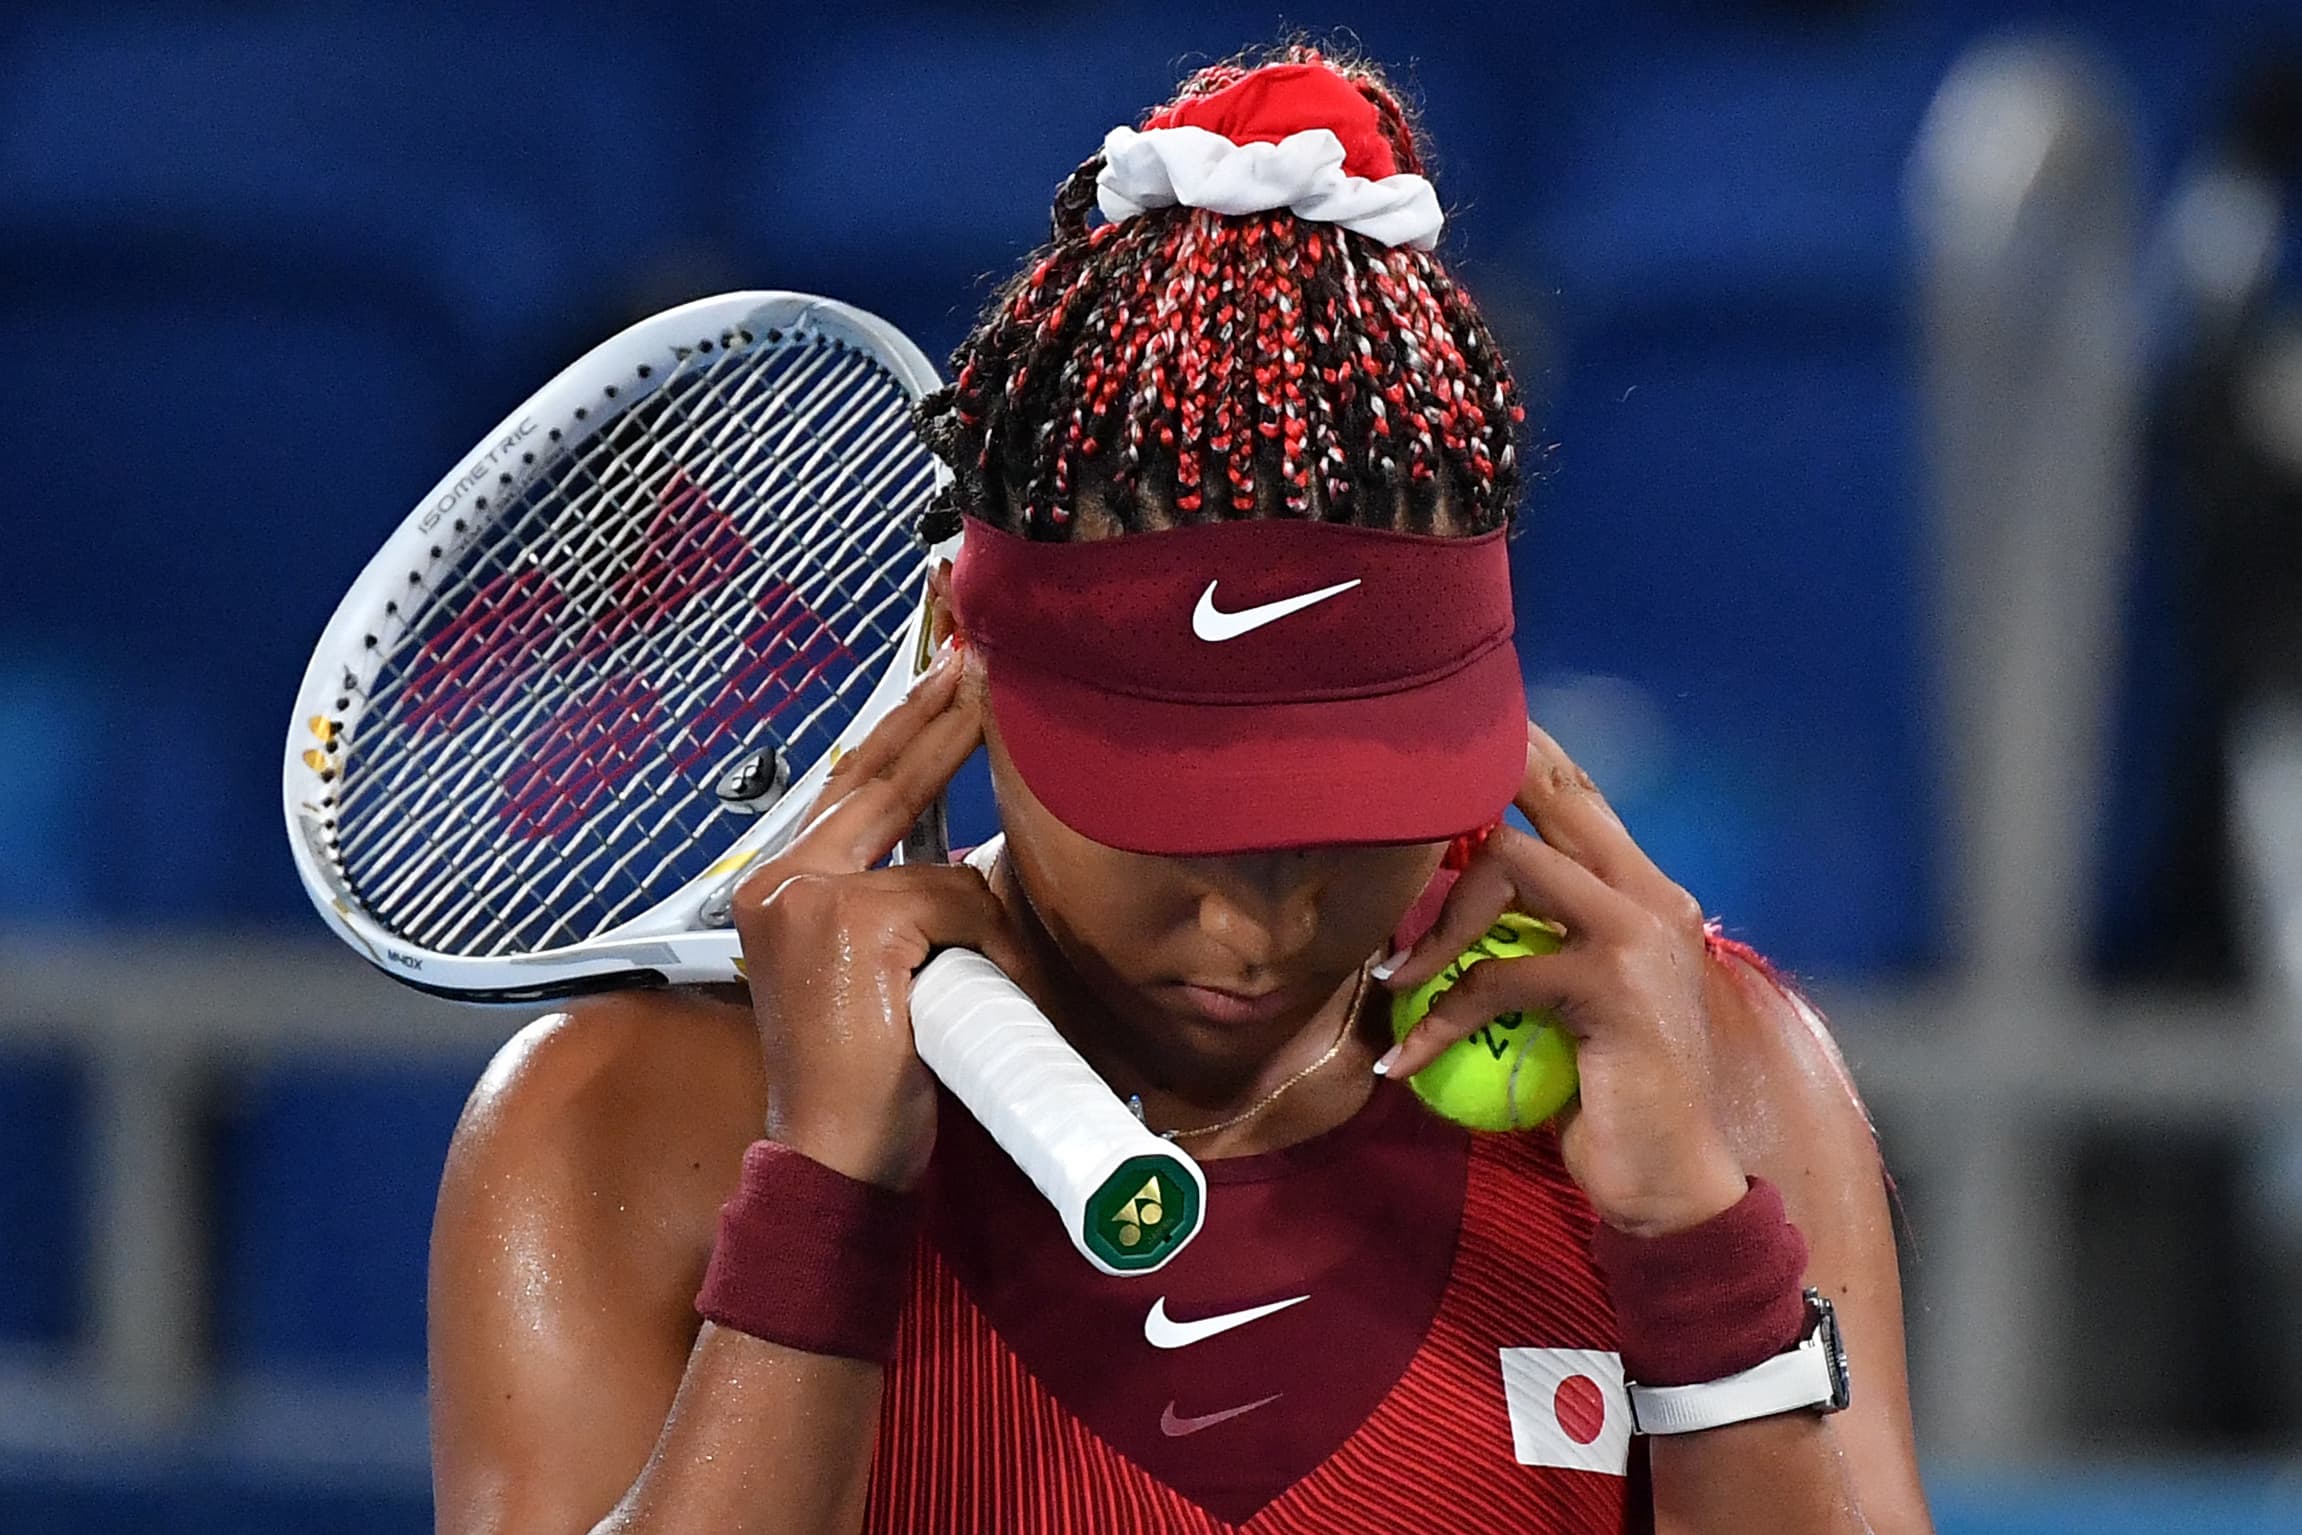 Osaka plans indefinite break from tennis after shock US Open exit